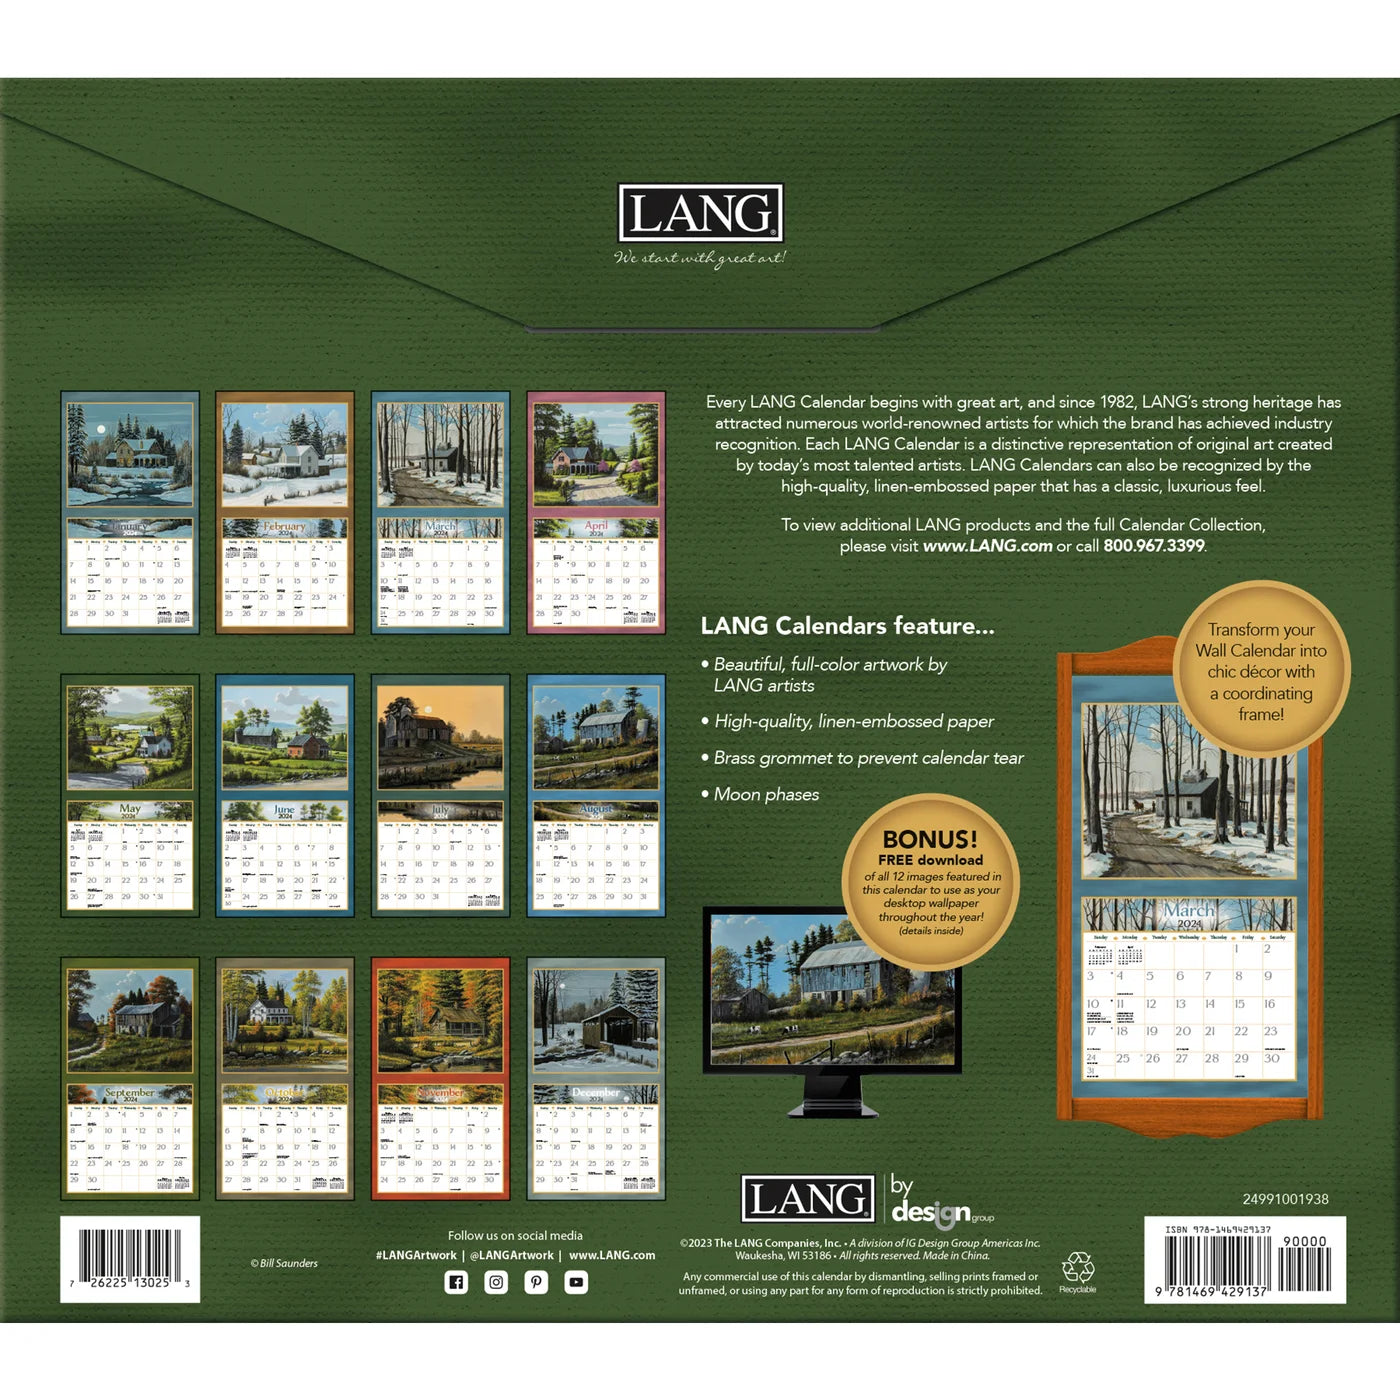 2024 LANG Road Home By Bill Saunders - Deluxe Wall Calendar